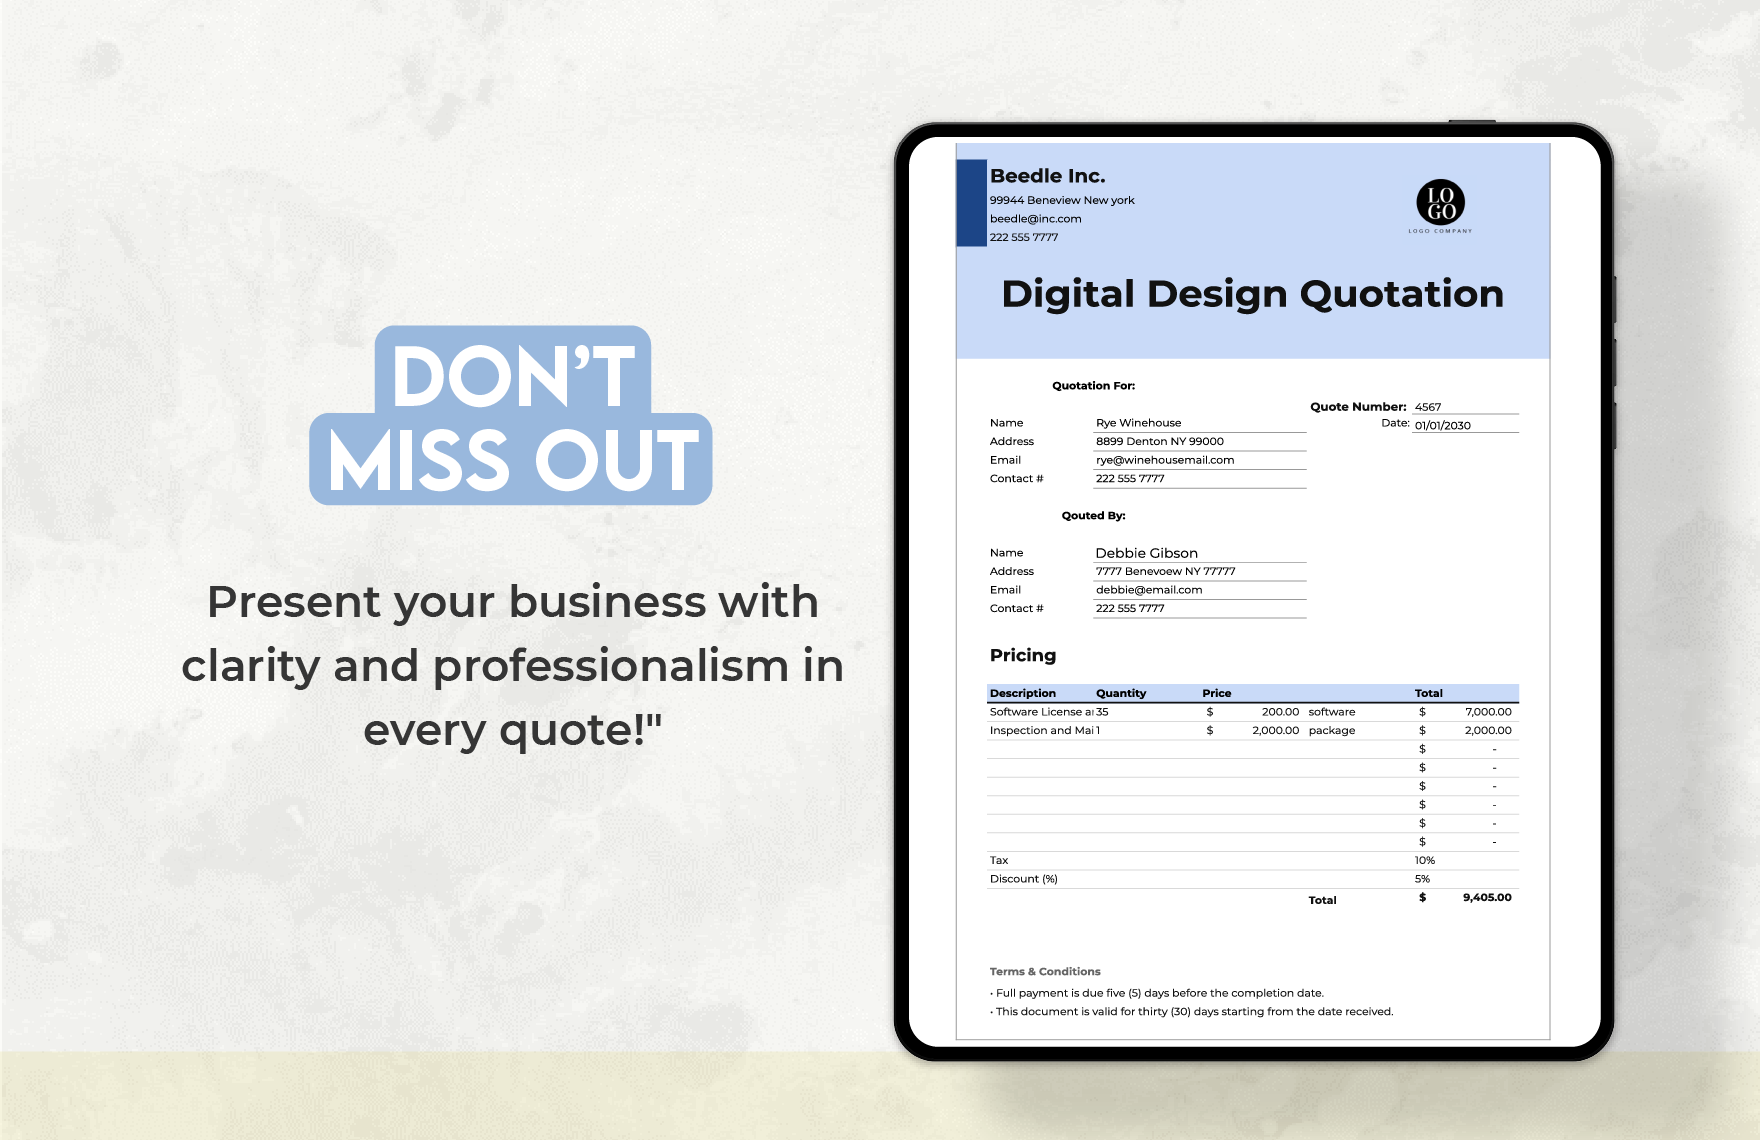 Business Quotation Sample Template